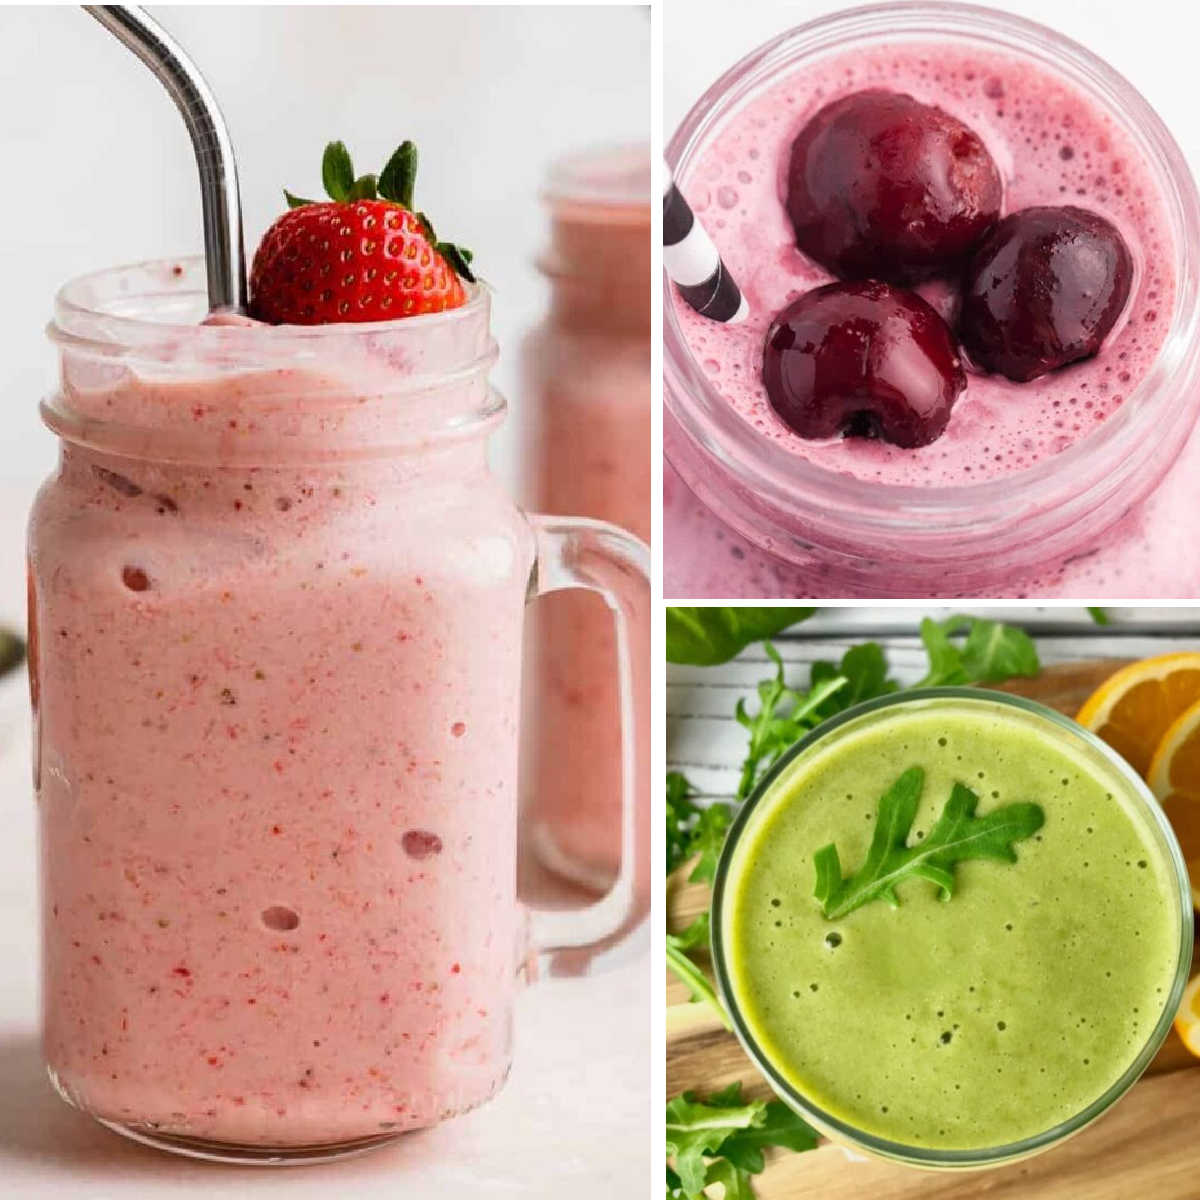 Best Smoothie Recipes You Have to Try